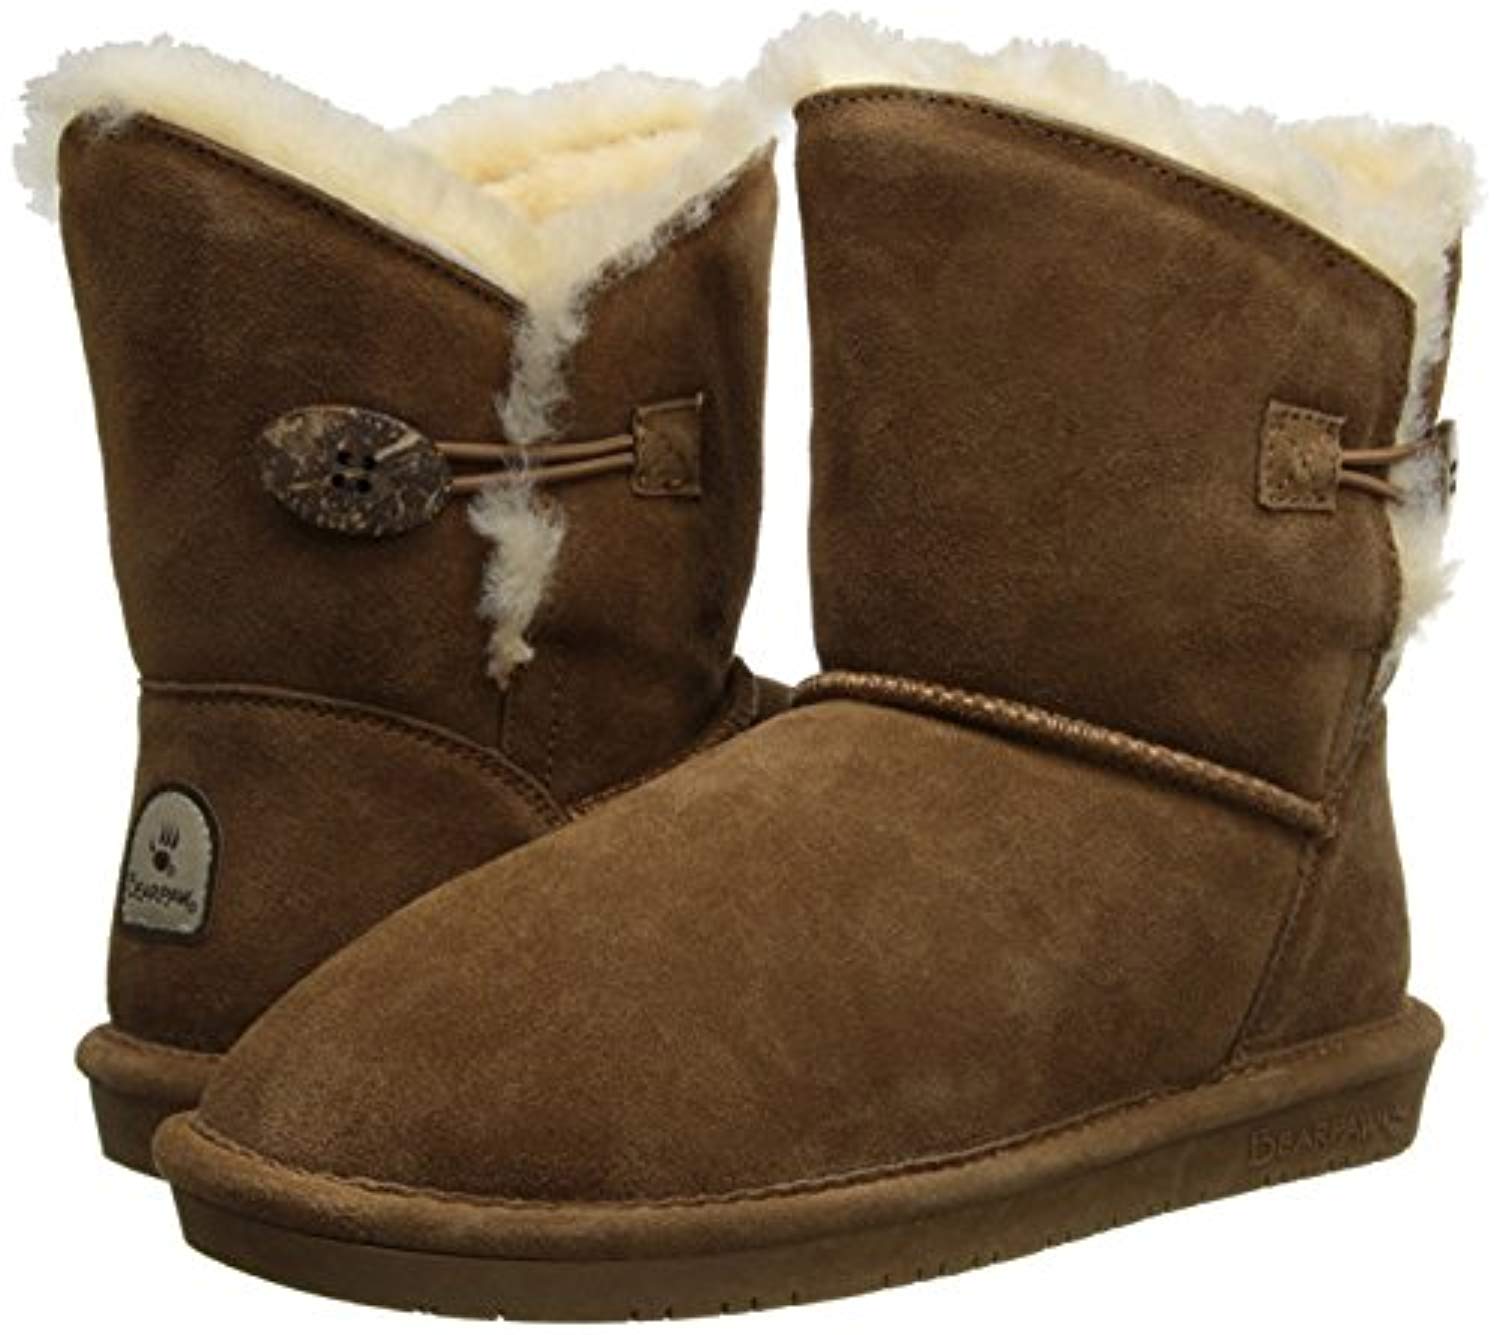 bear claw boots for women